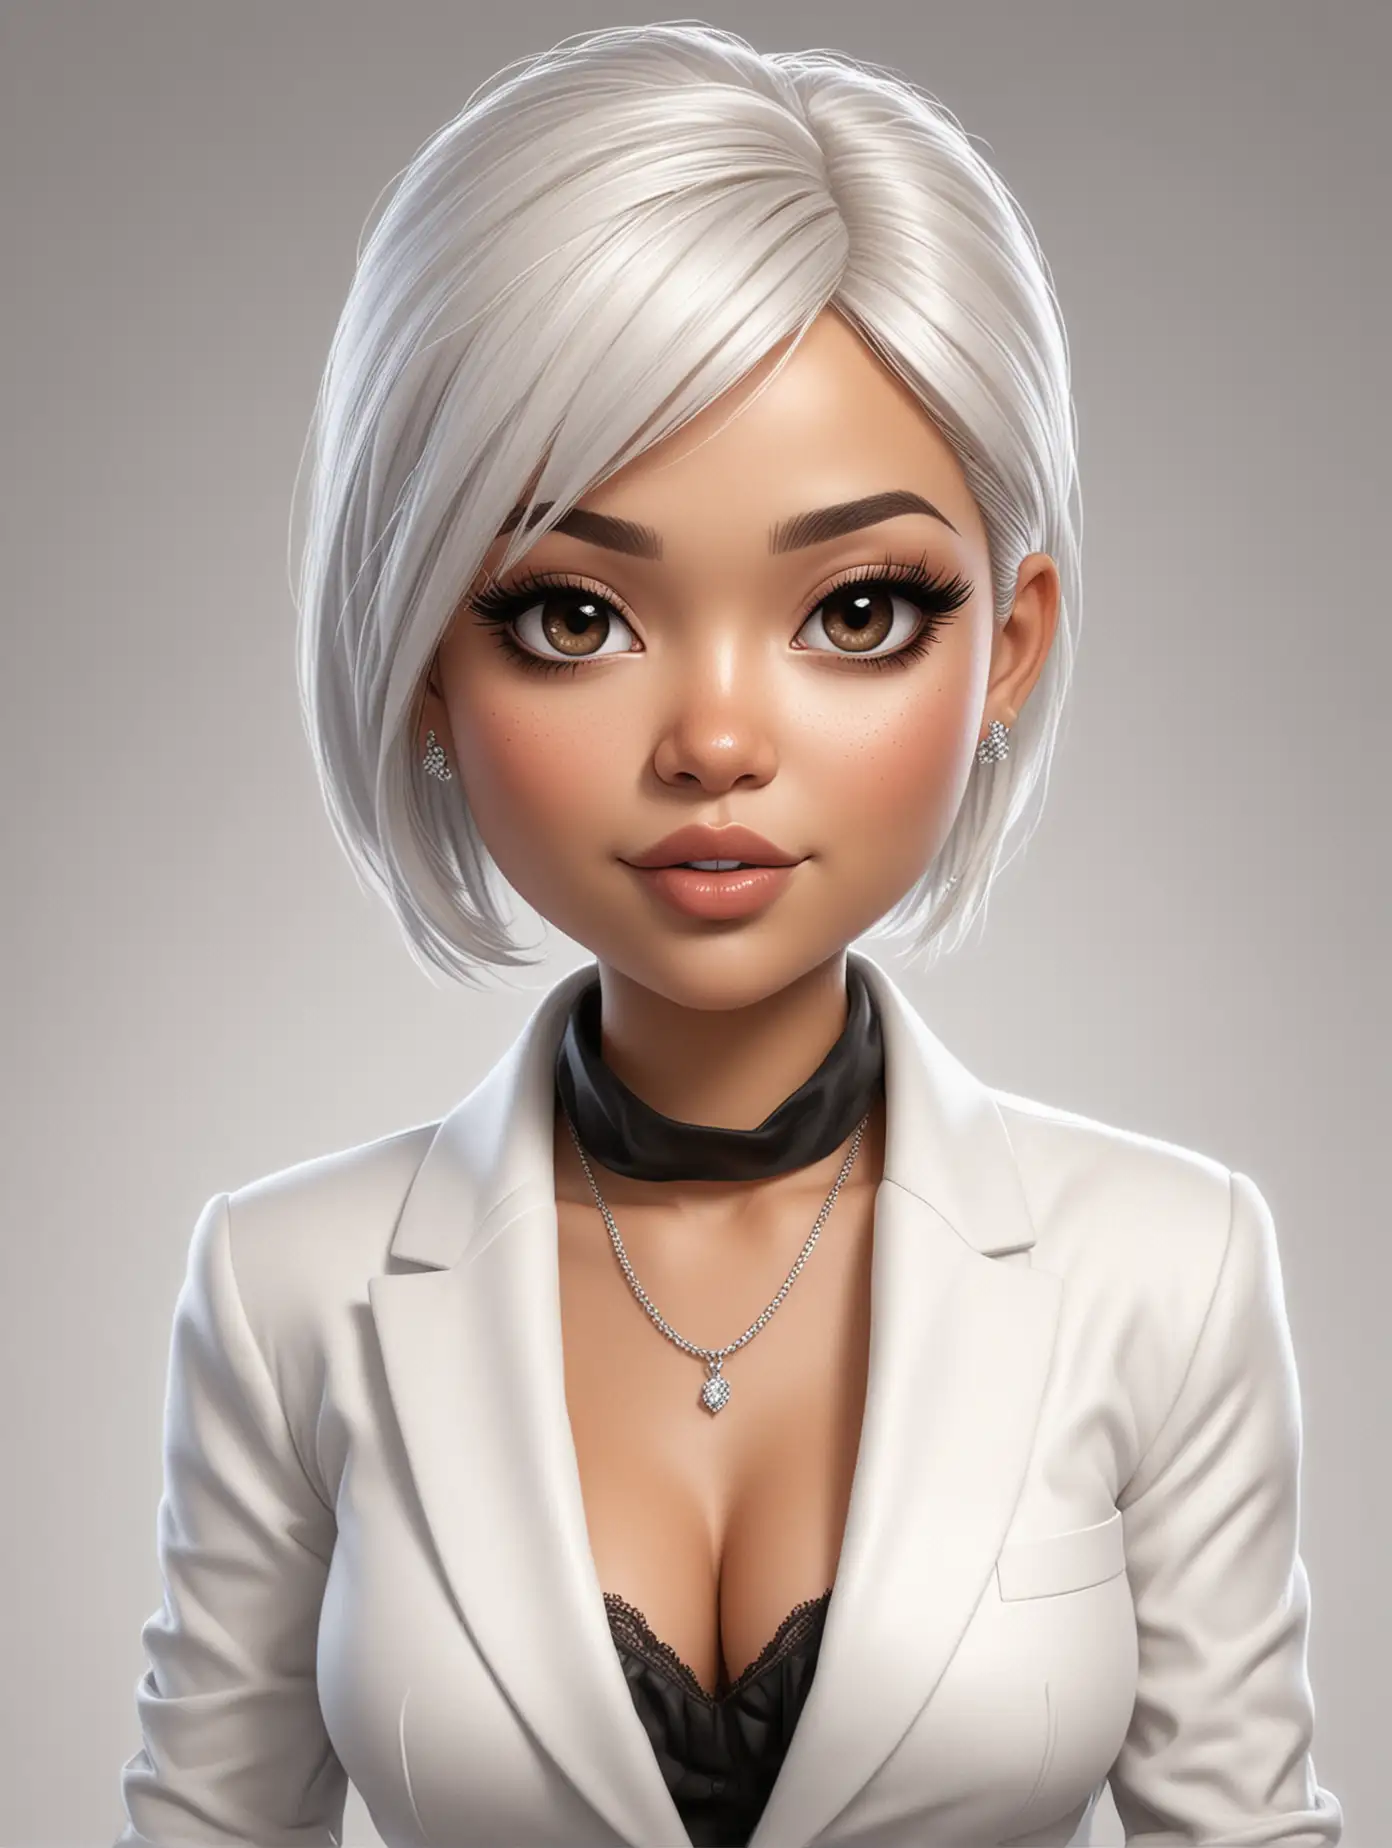 Black and white realistic illustration of a beautiful grown-up latina woman, chibi style, with white skin, white straight short bob hair with a fringe, big almond eyes, pointy chin, wearing a whit professional business woman outfit, jewelry, white background, her hair is up in a bun, her hands are behind her back, she wears a blazer over her lace bra, high heels, purse